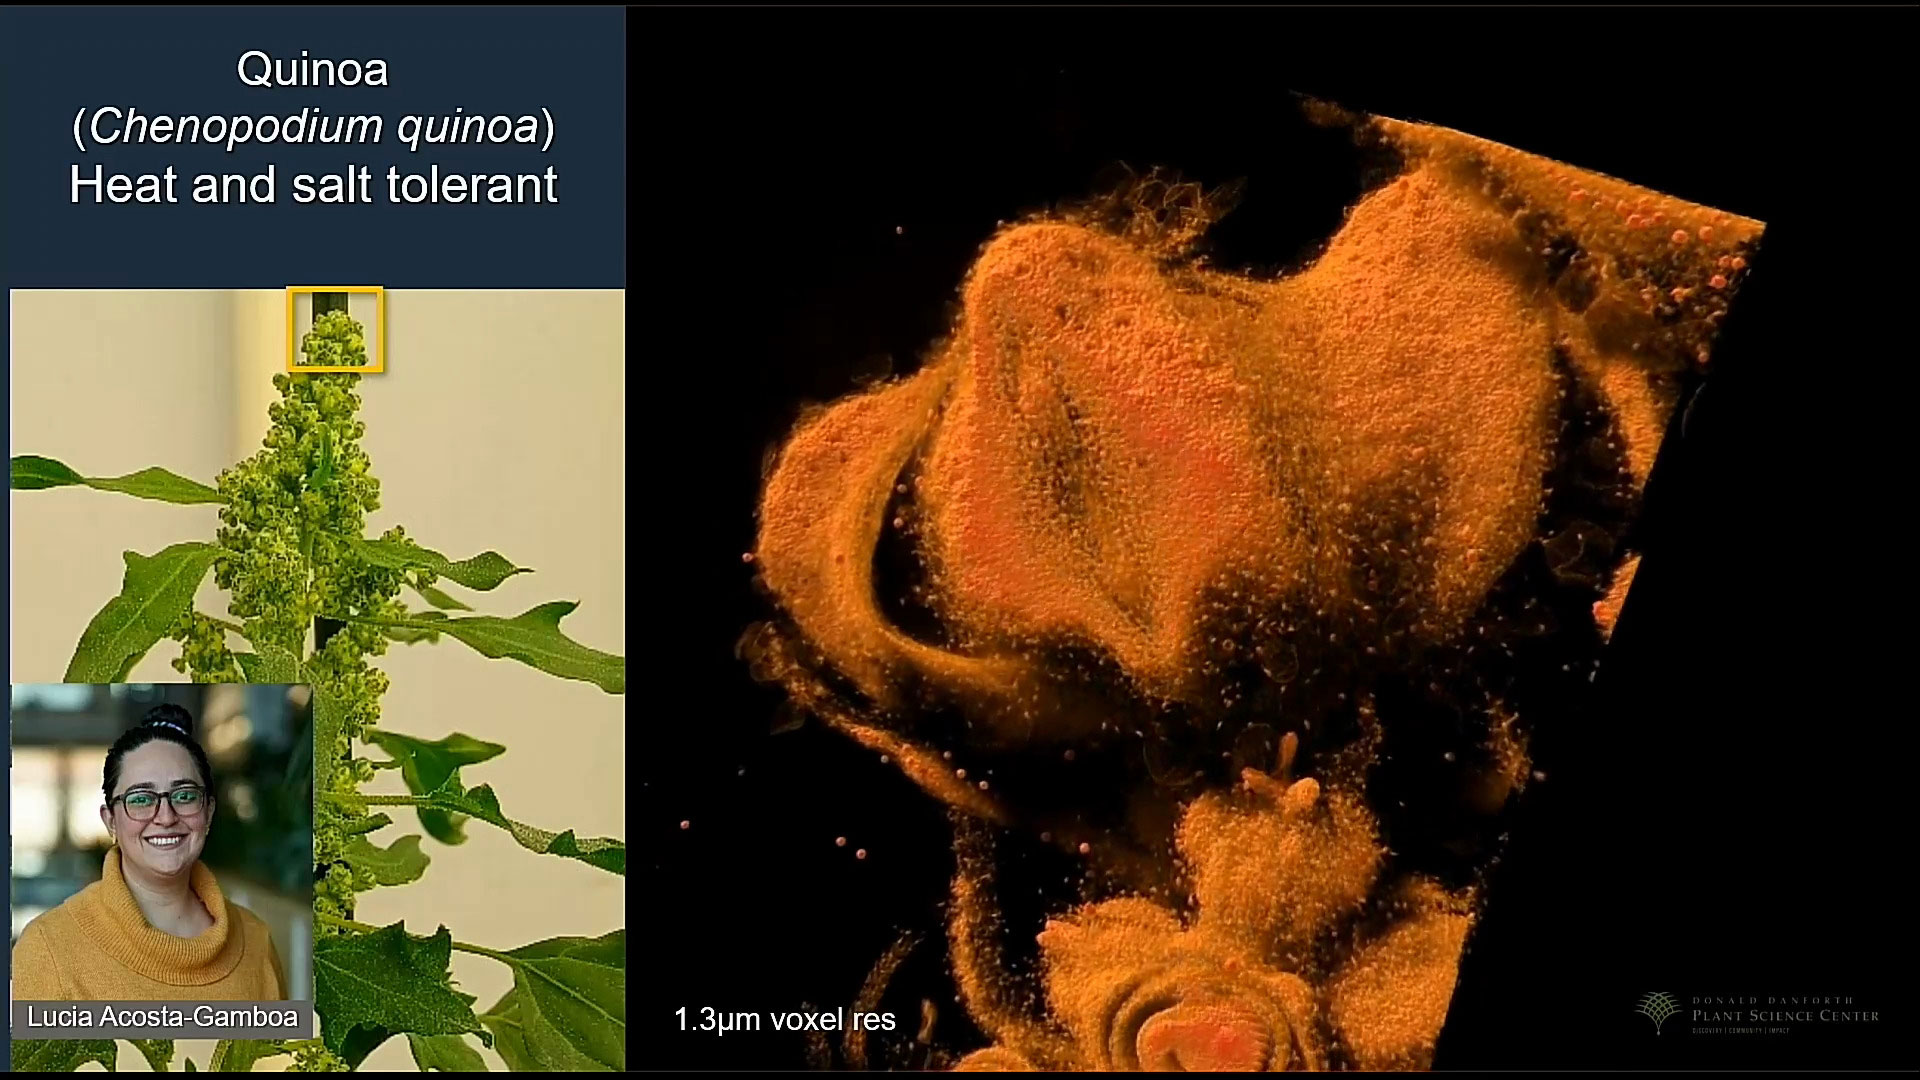 Webinar: X-ray microscopy - Bringing multiscale 3D volume imaging to plant biology